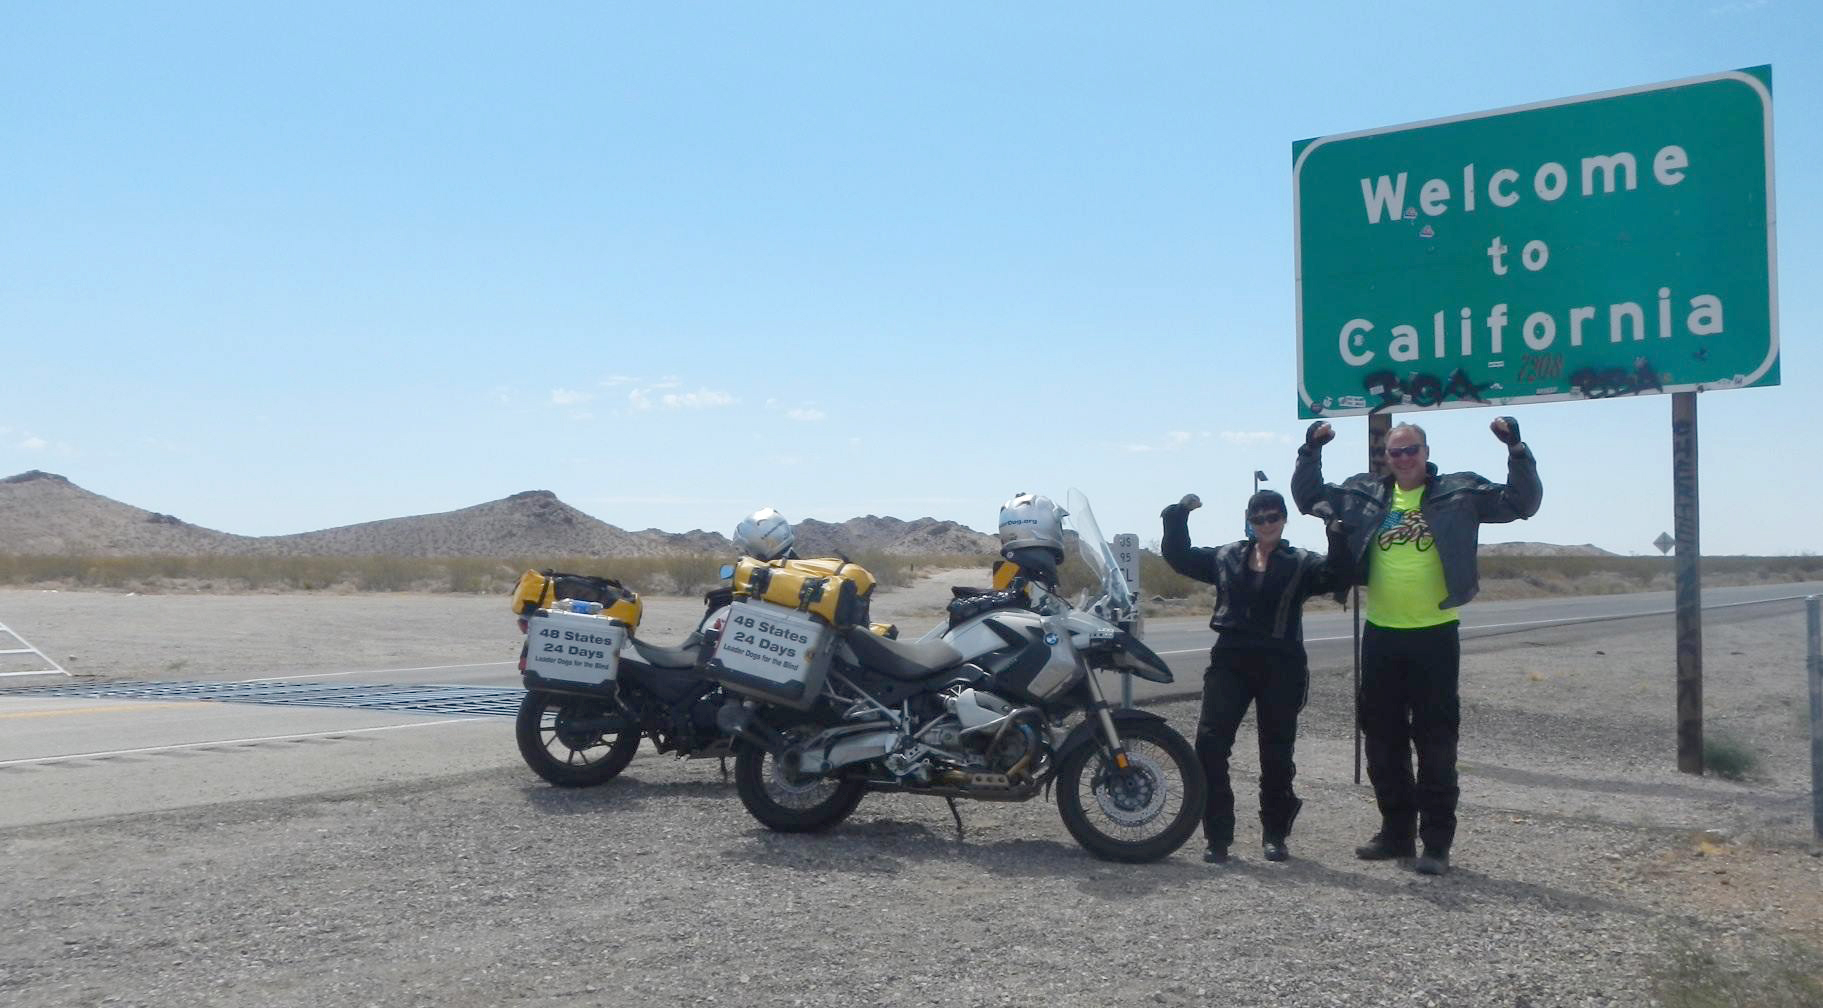 La Center: La Center Lions Club members Mark and Debbie Mansell rest on July 8 at the California state line near the end of a U.S. motorcycle tour that took them across 48 states in 24 days.